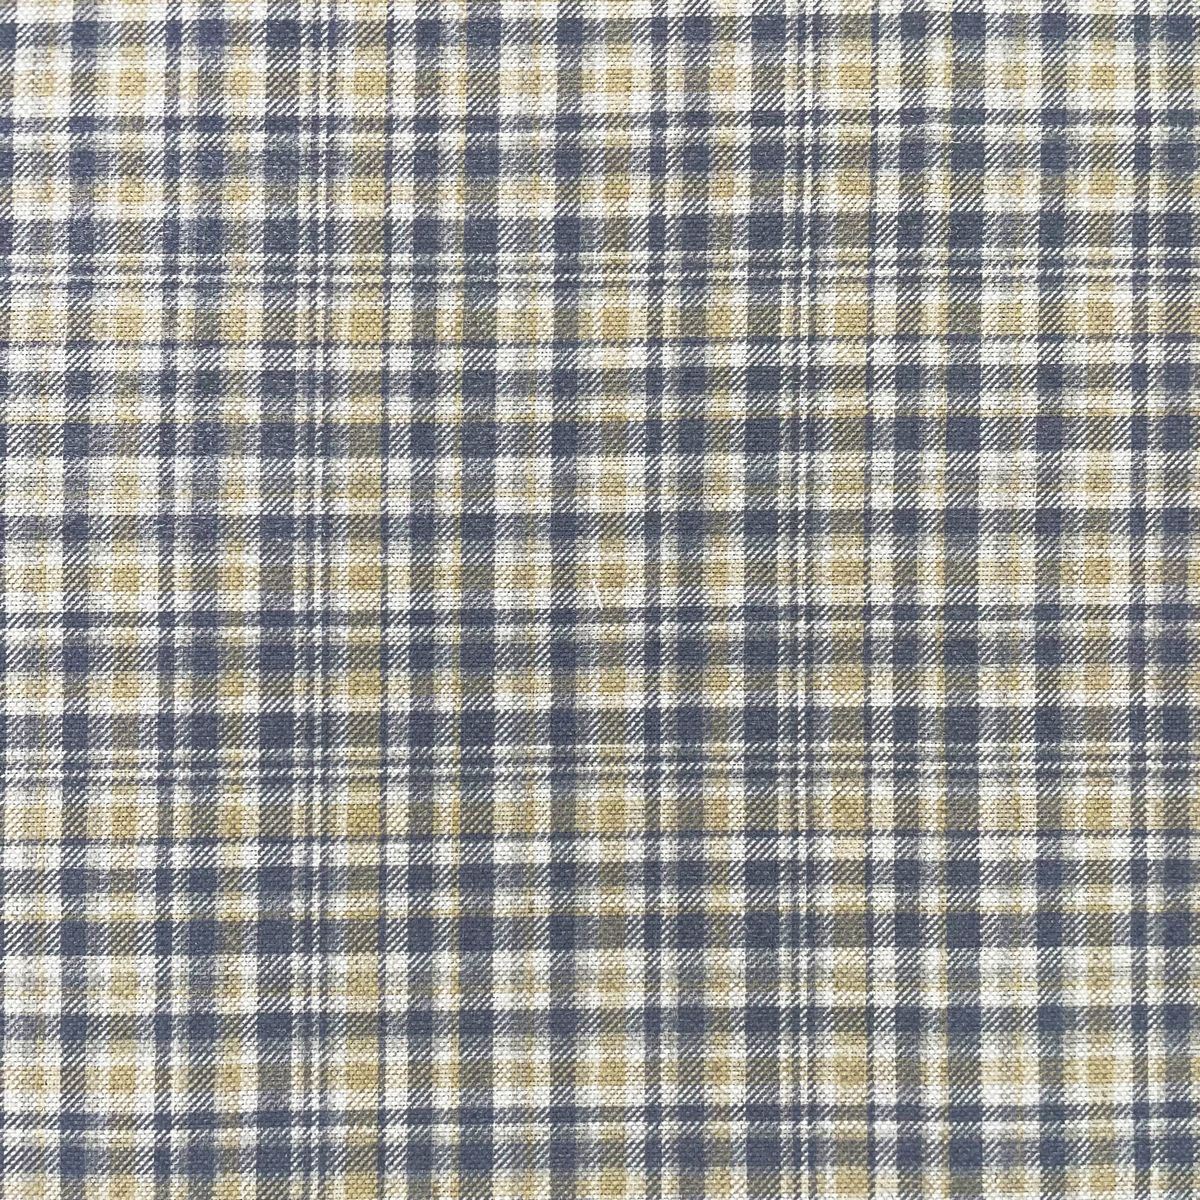 Ramsay Buttercup Fabric by Chatham Glyn